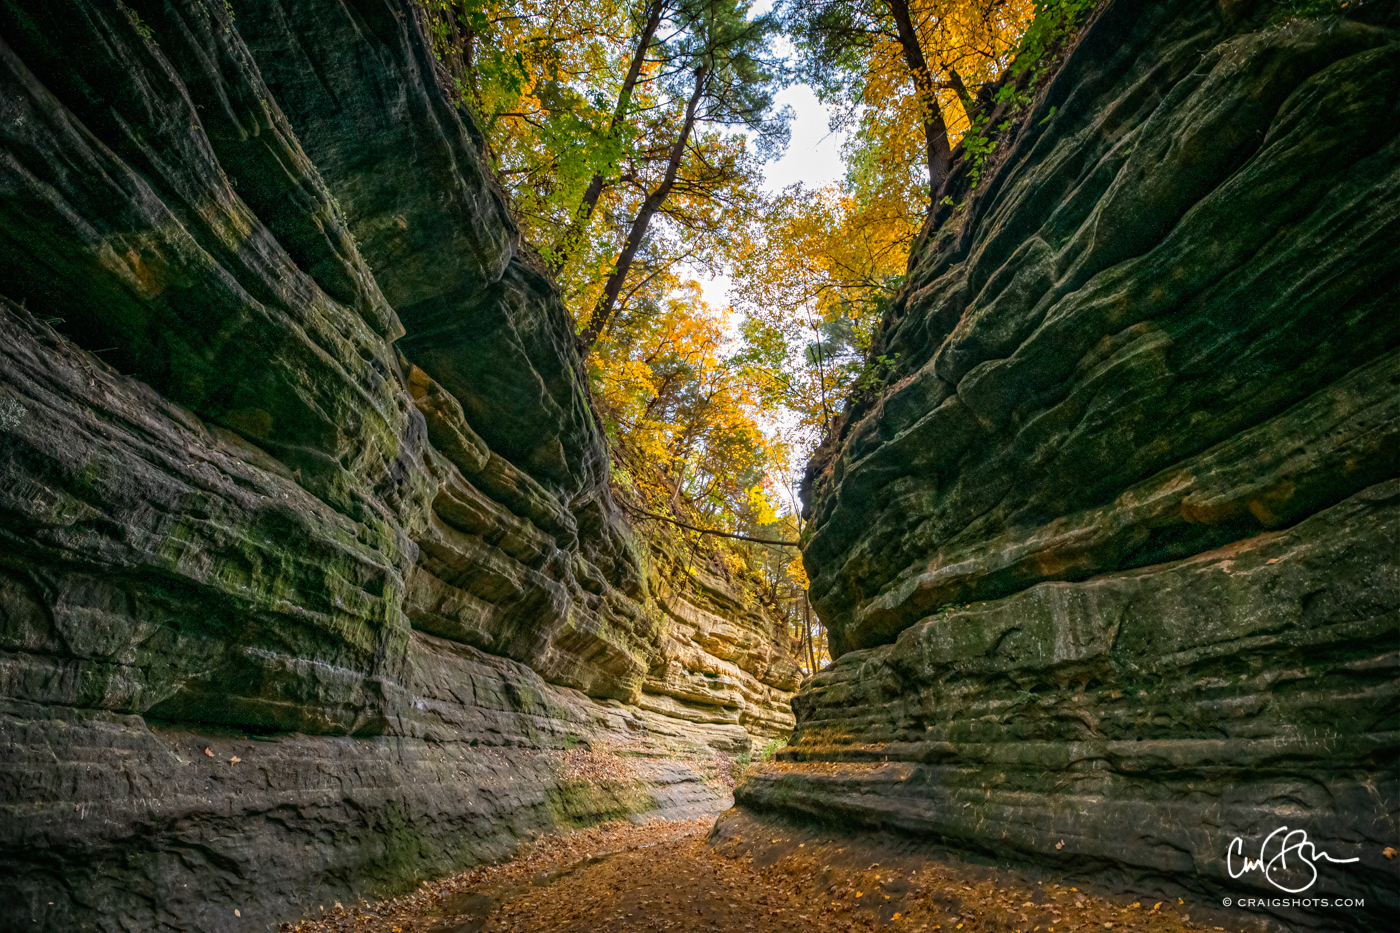 Oct 23: Canyon, Starved Rock State Park, Illinois